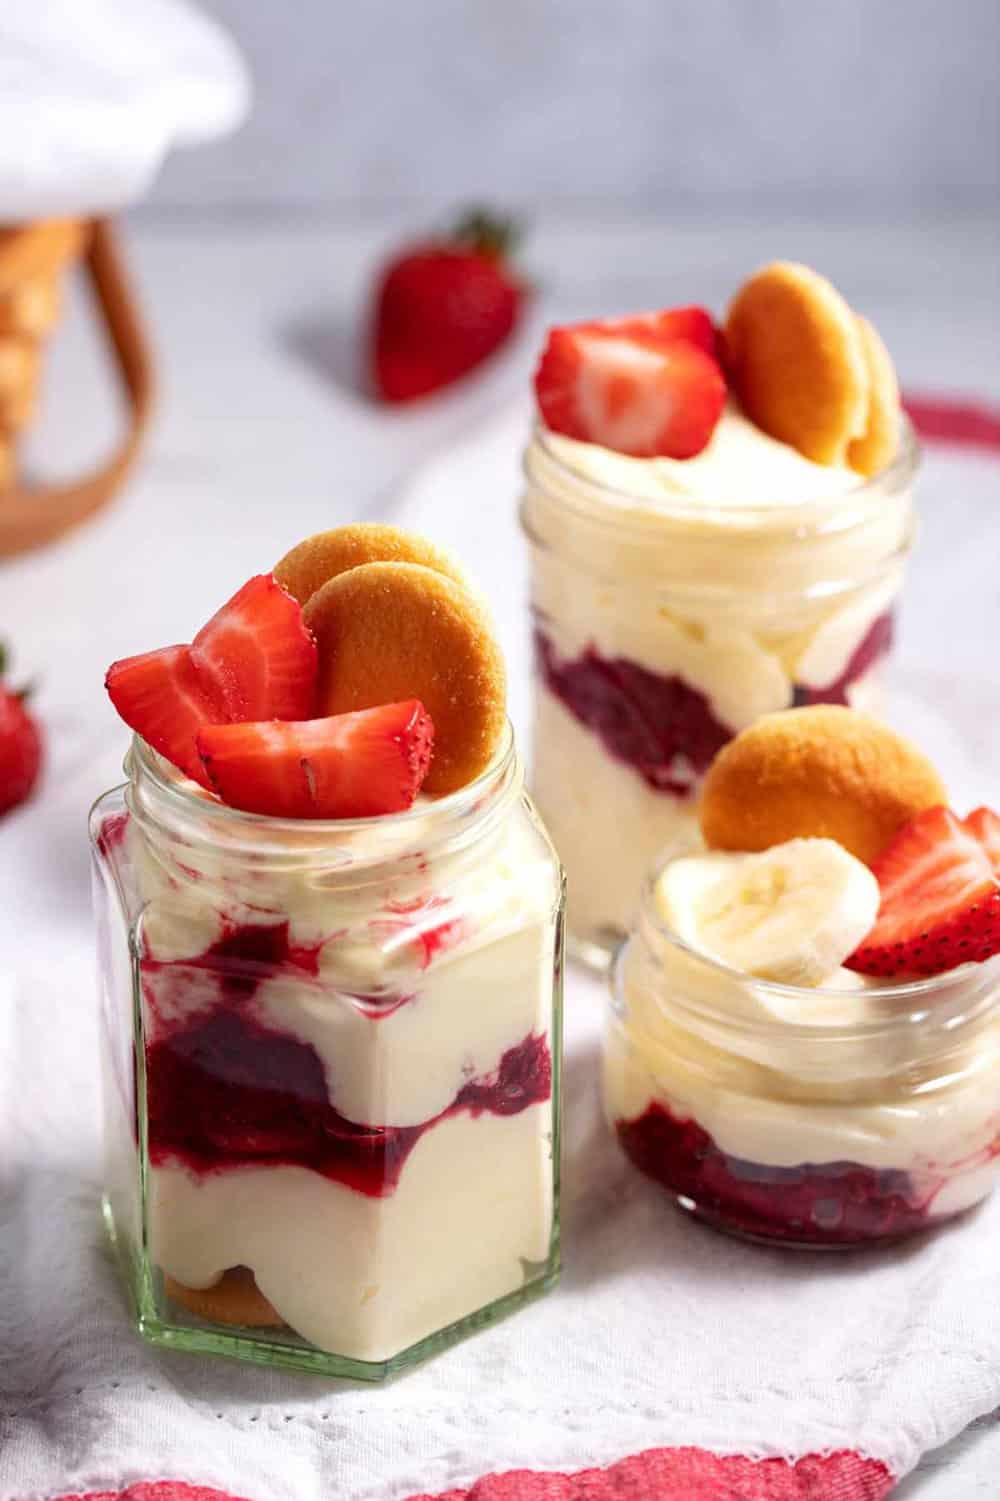 Serving strawberry banana pudding in glass jars.